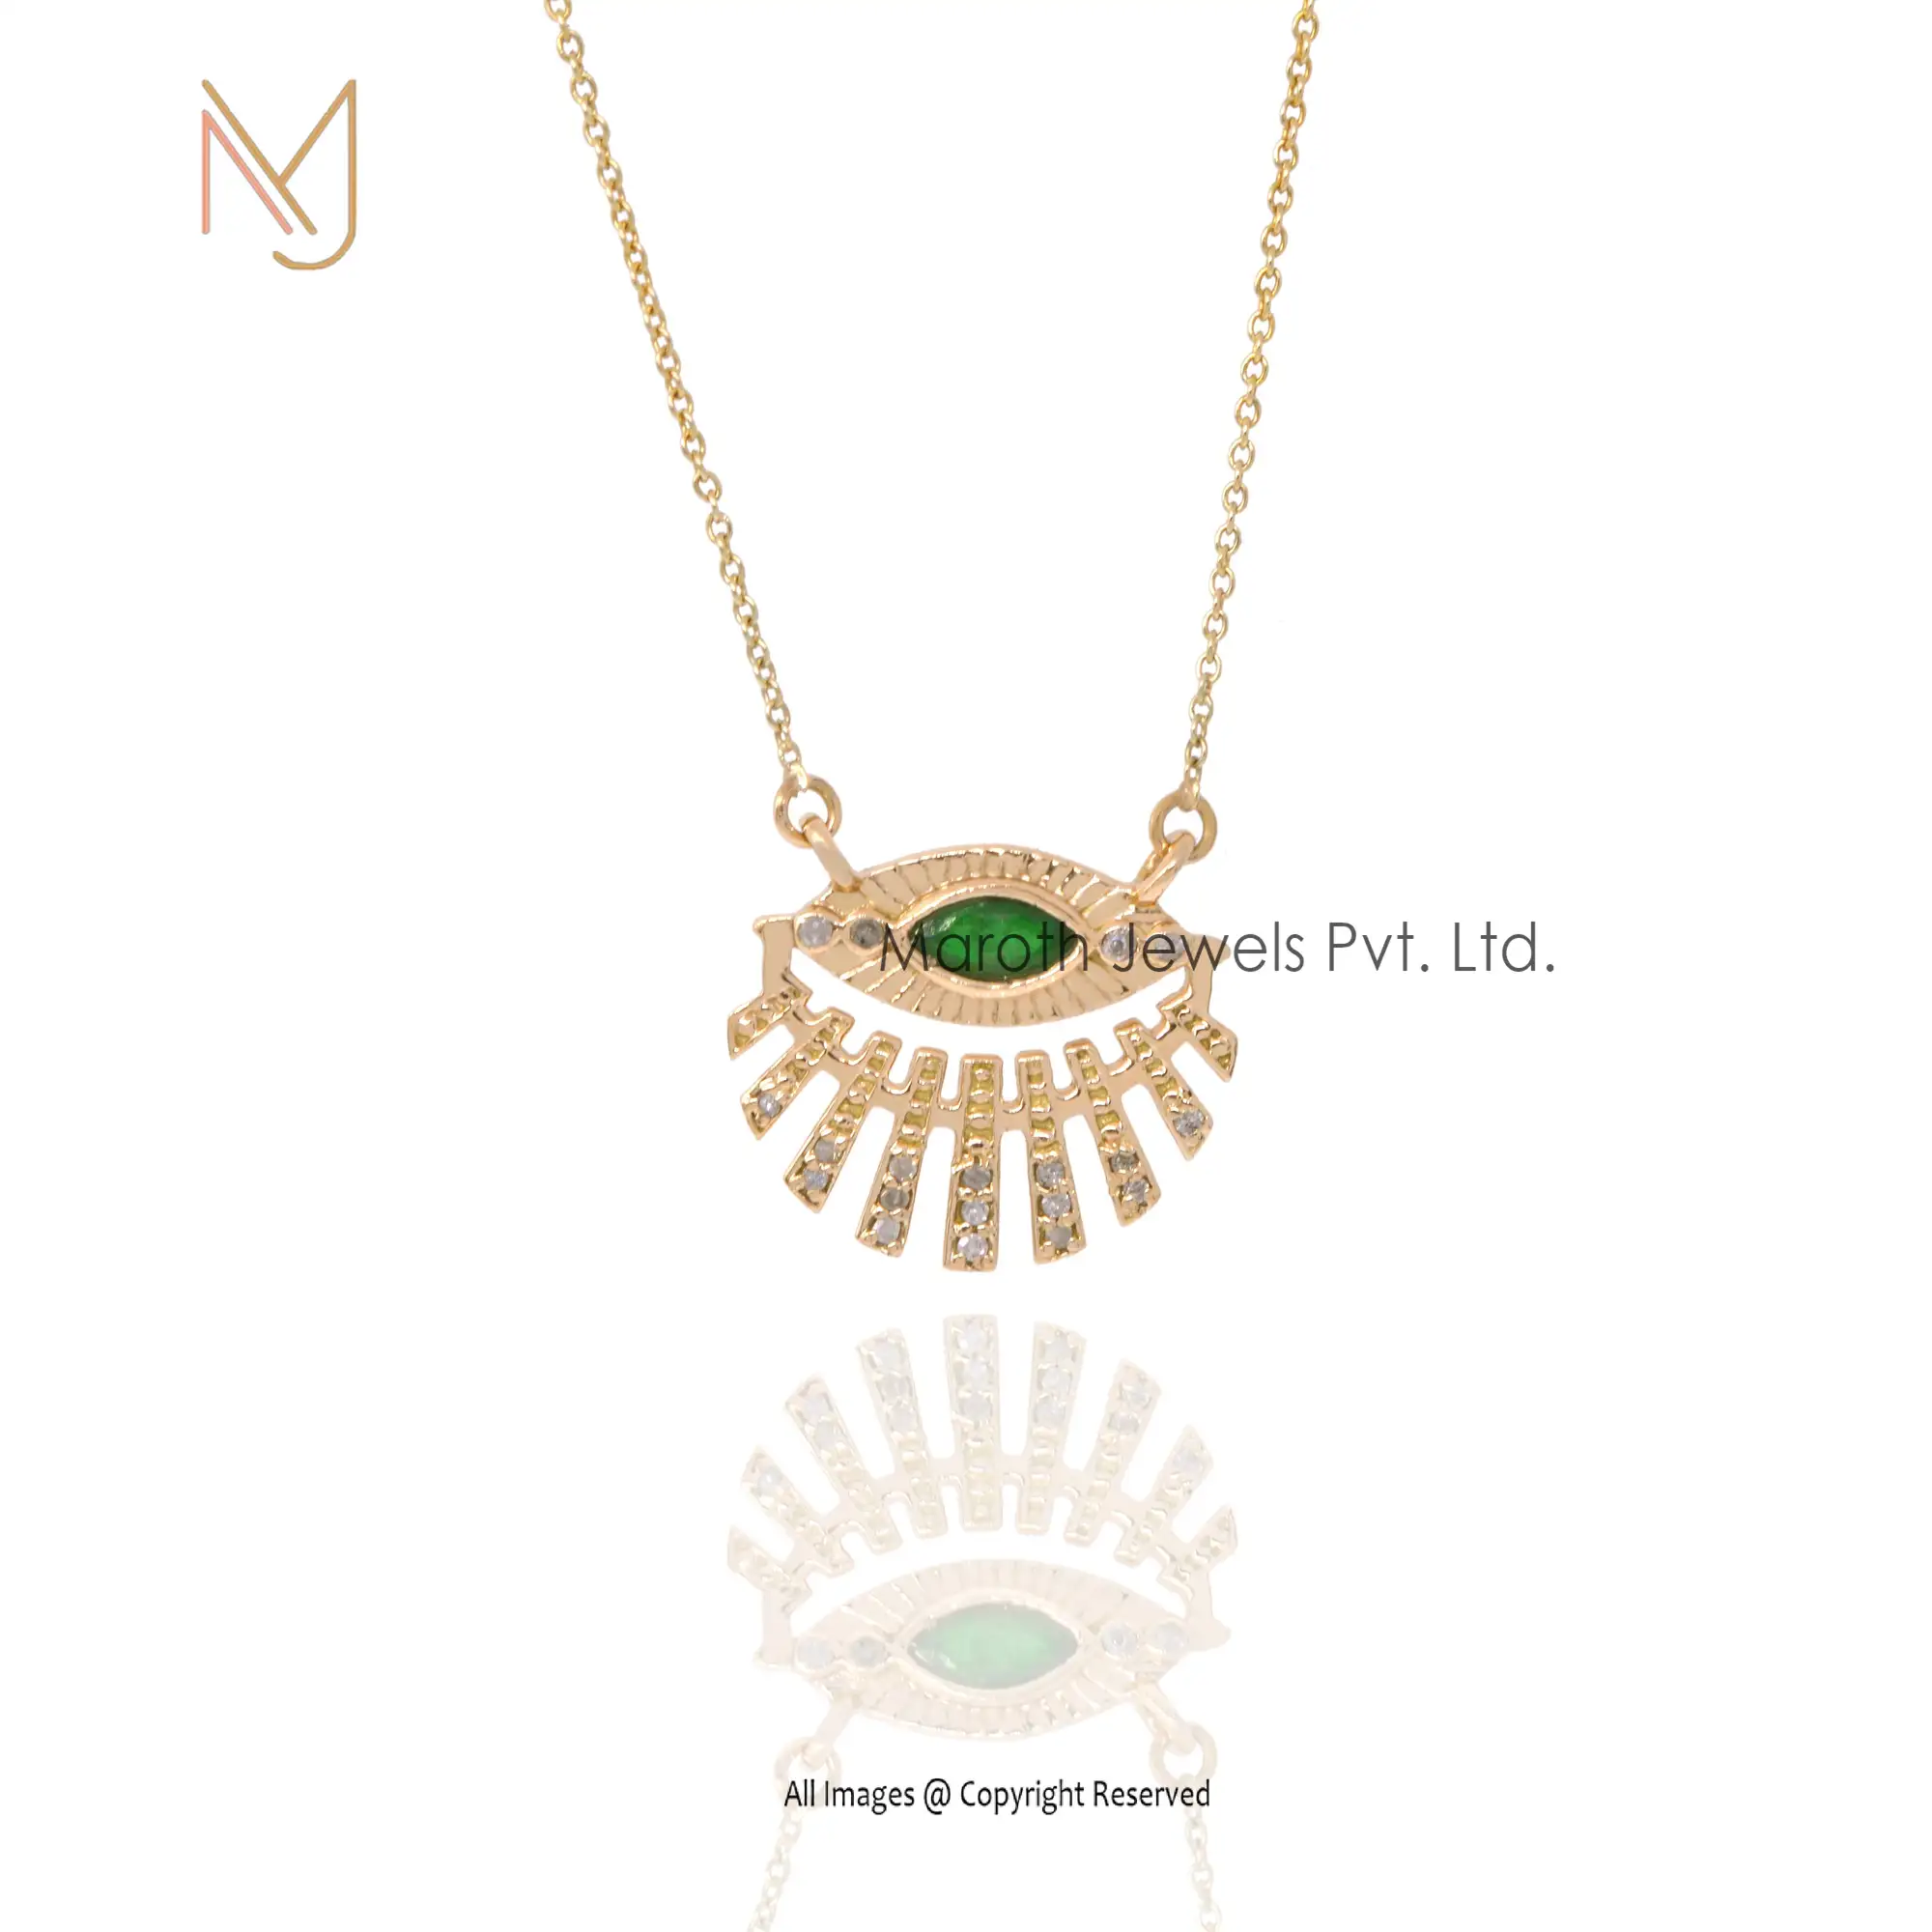 14K Yellow Gold With Diamond And Emerald Gemstone Evil eye Pendant Chain Necklace Manufacturer